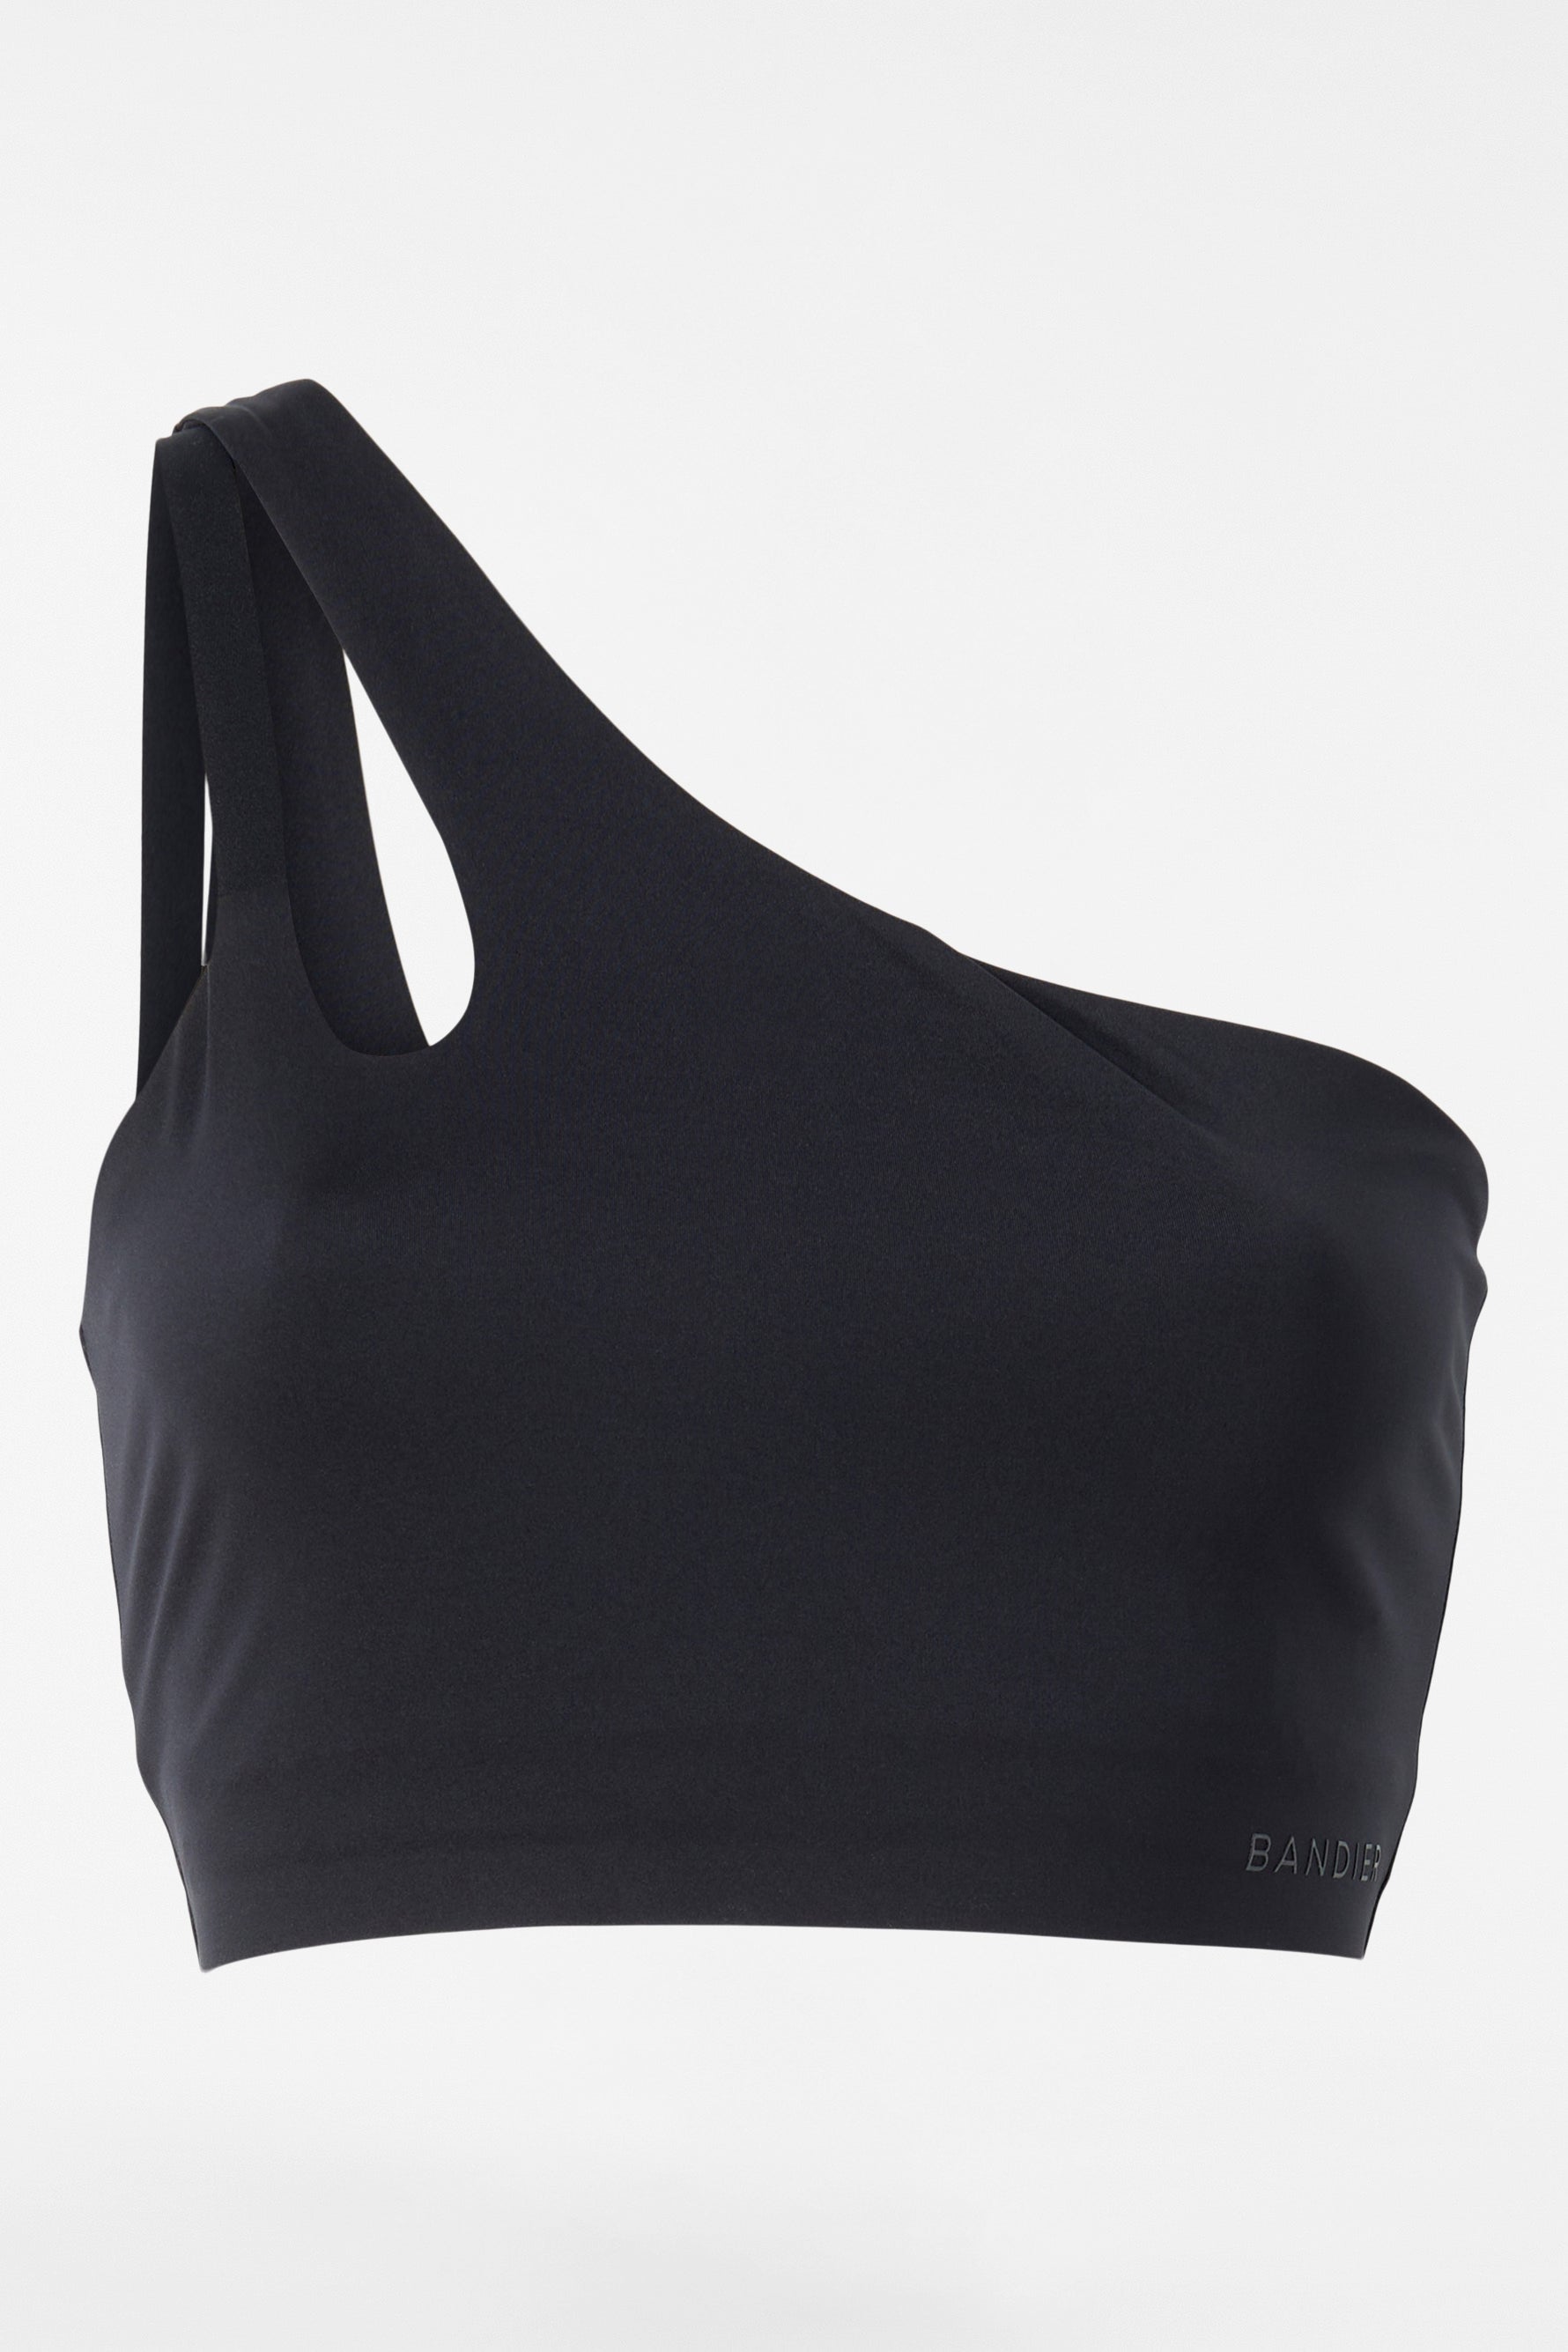 Buy AP HASHTAG Pack of 1 Air Bra for Girls and Women, (Free Size), 34AIRBRA  Black at